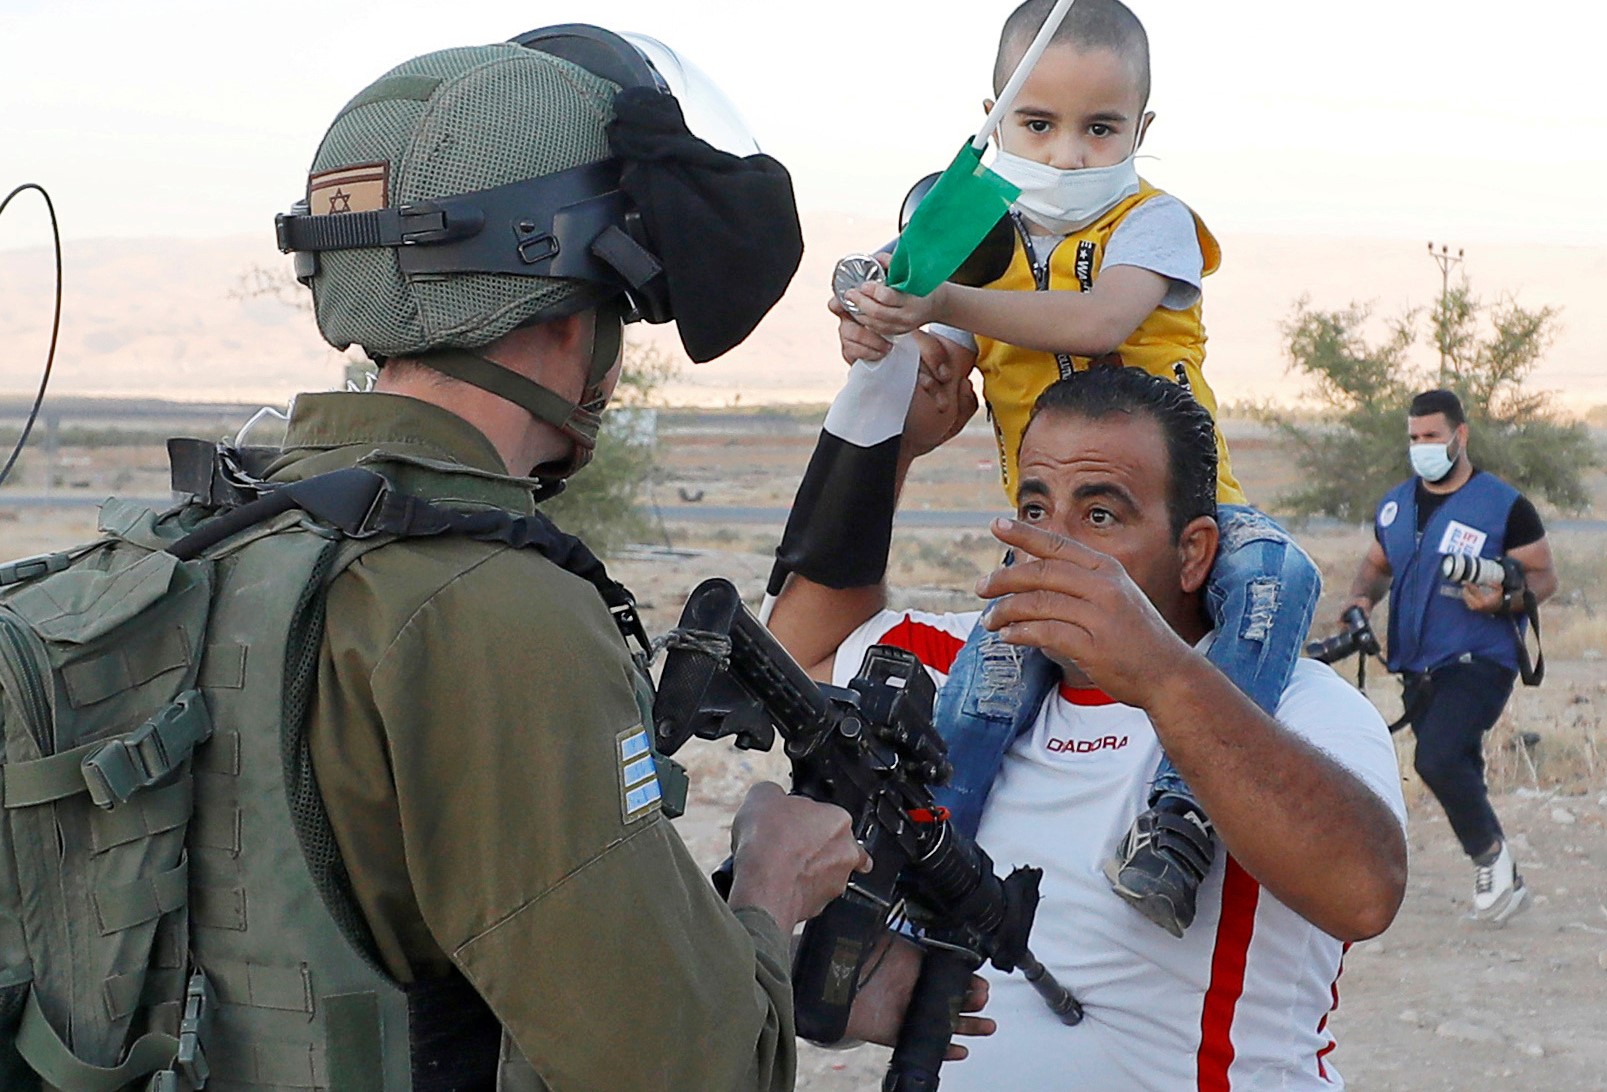 A Palestinian man argues with an Israeli soldier during a protest against Israel's plan to annex parts of the occupied West Bank, in Jordan Valley June 24, 2020